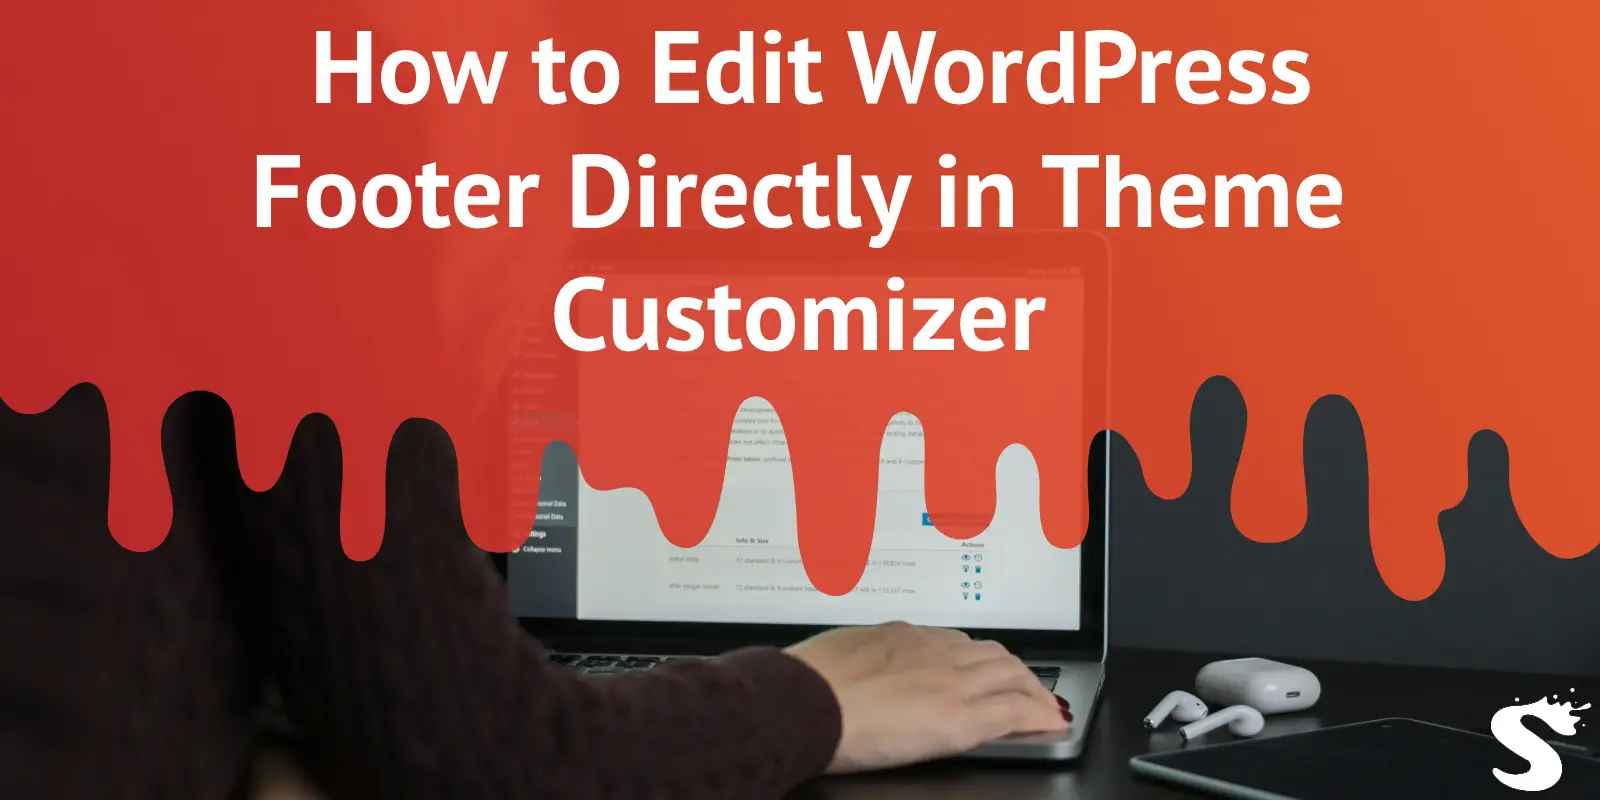 How to Edit WordPress Footer Directly in Theme Customizer